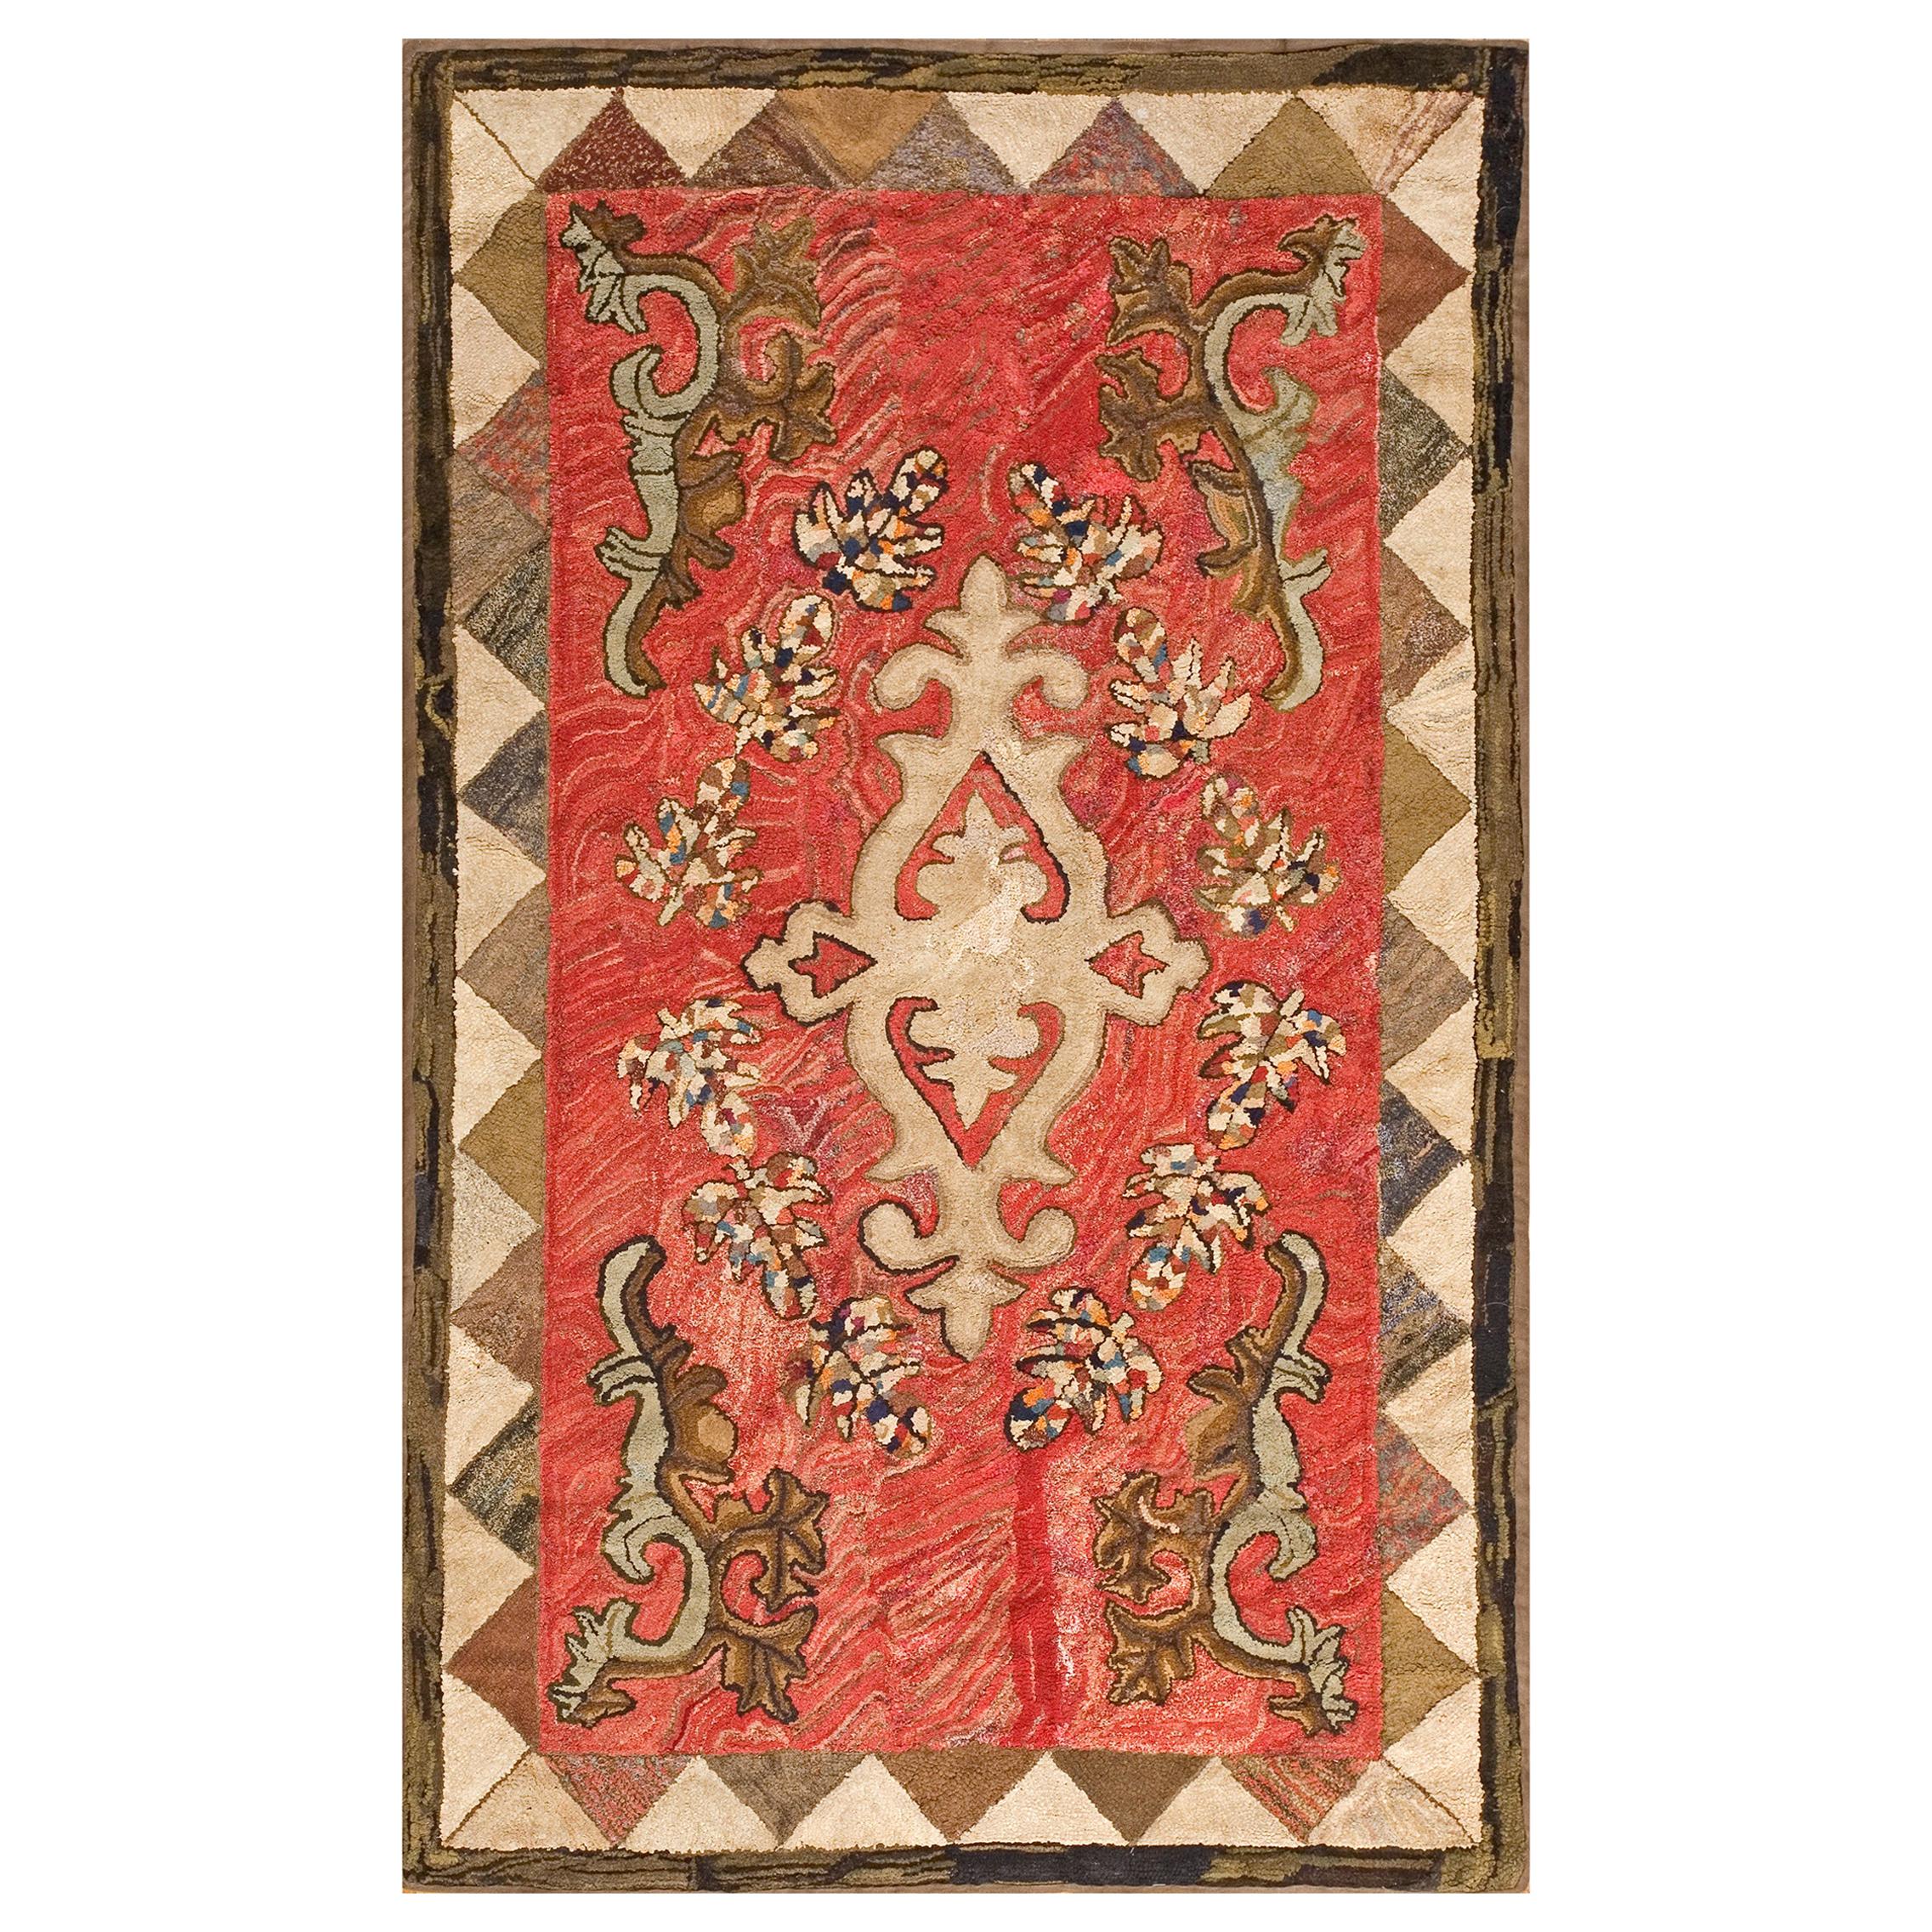 Early 20th Century American Hooked Rug ( 4'4" x 7'4" - 132 x 223 cm ) For Sale